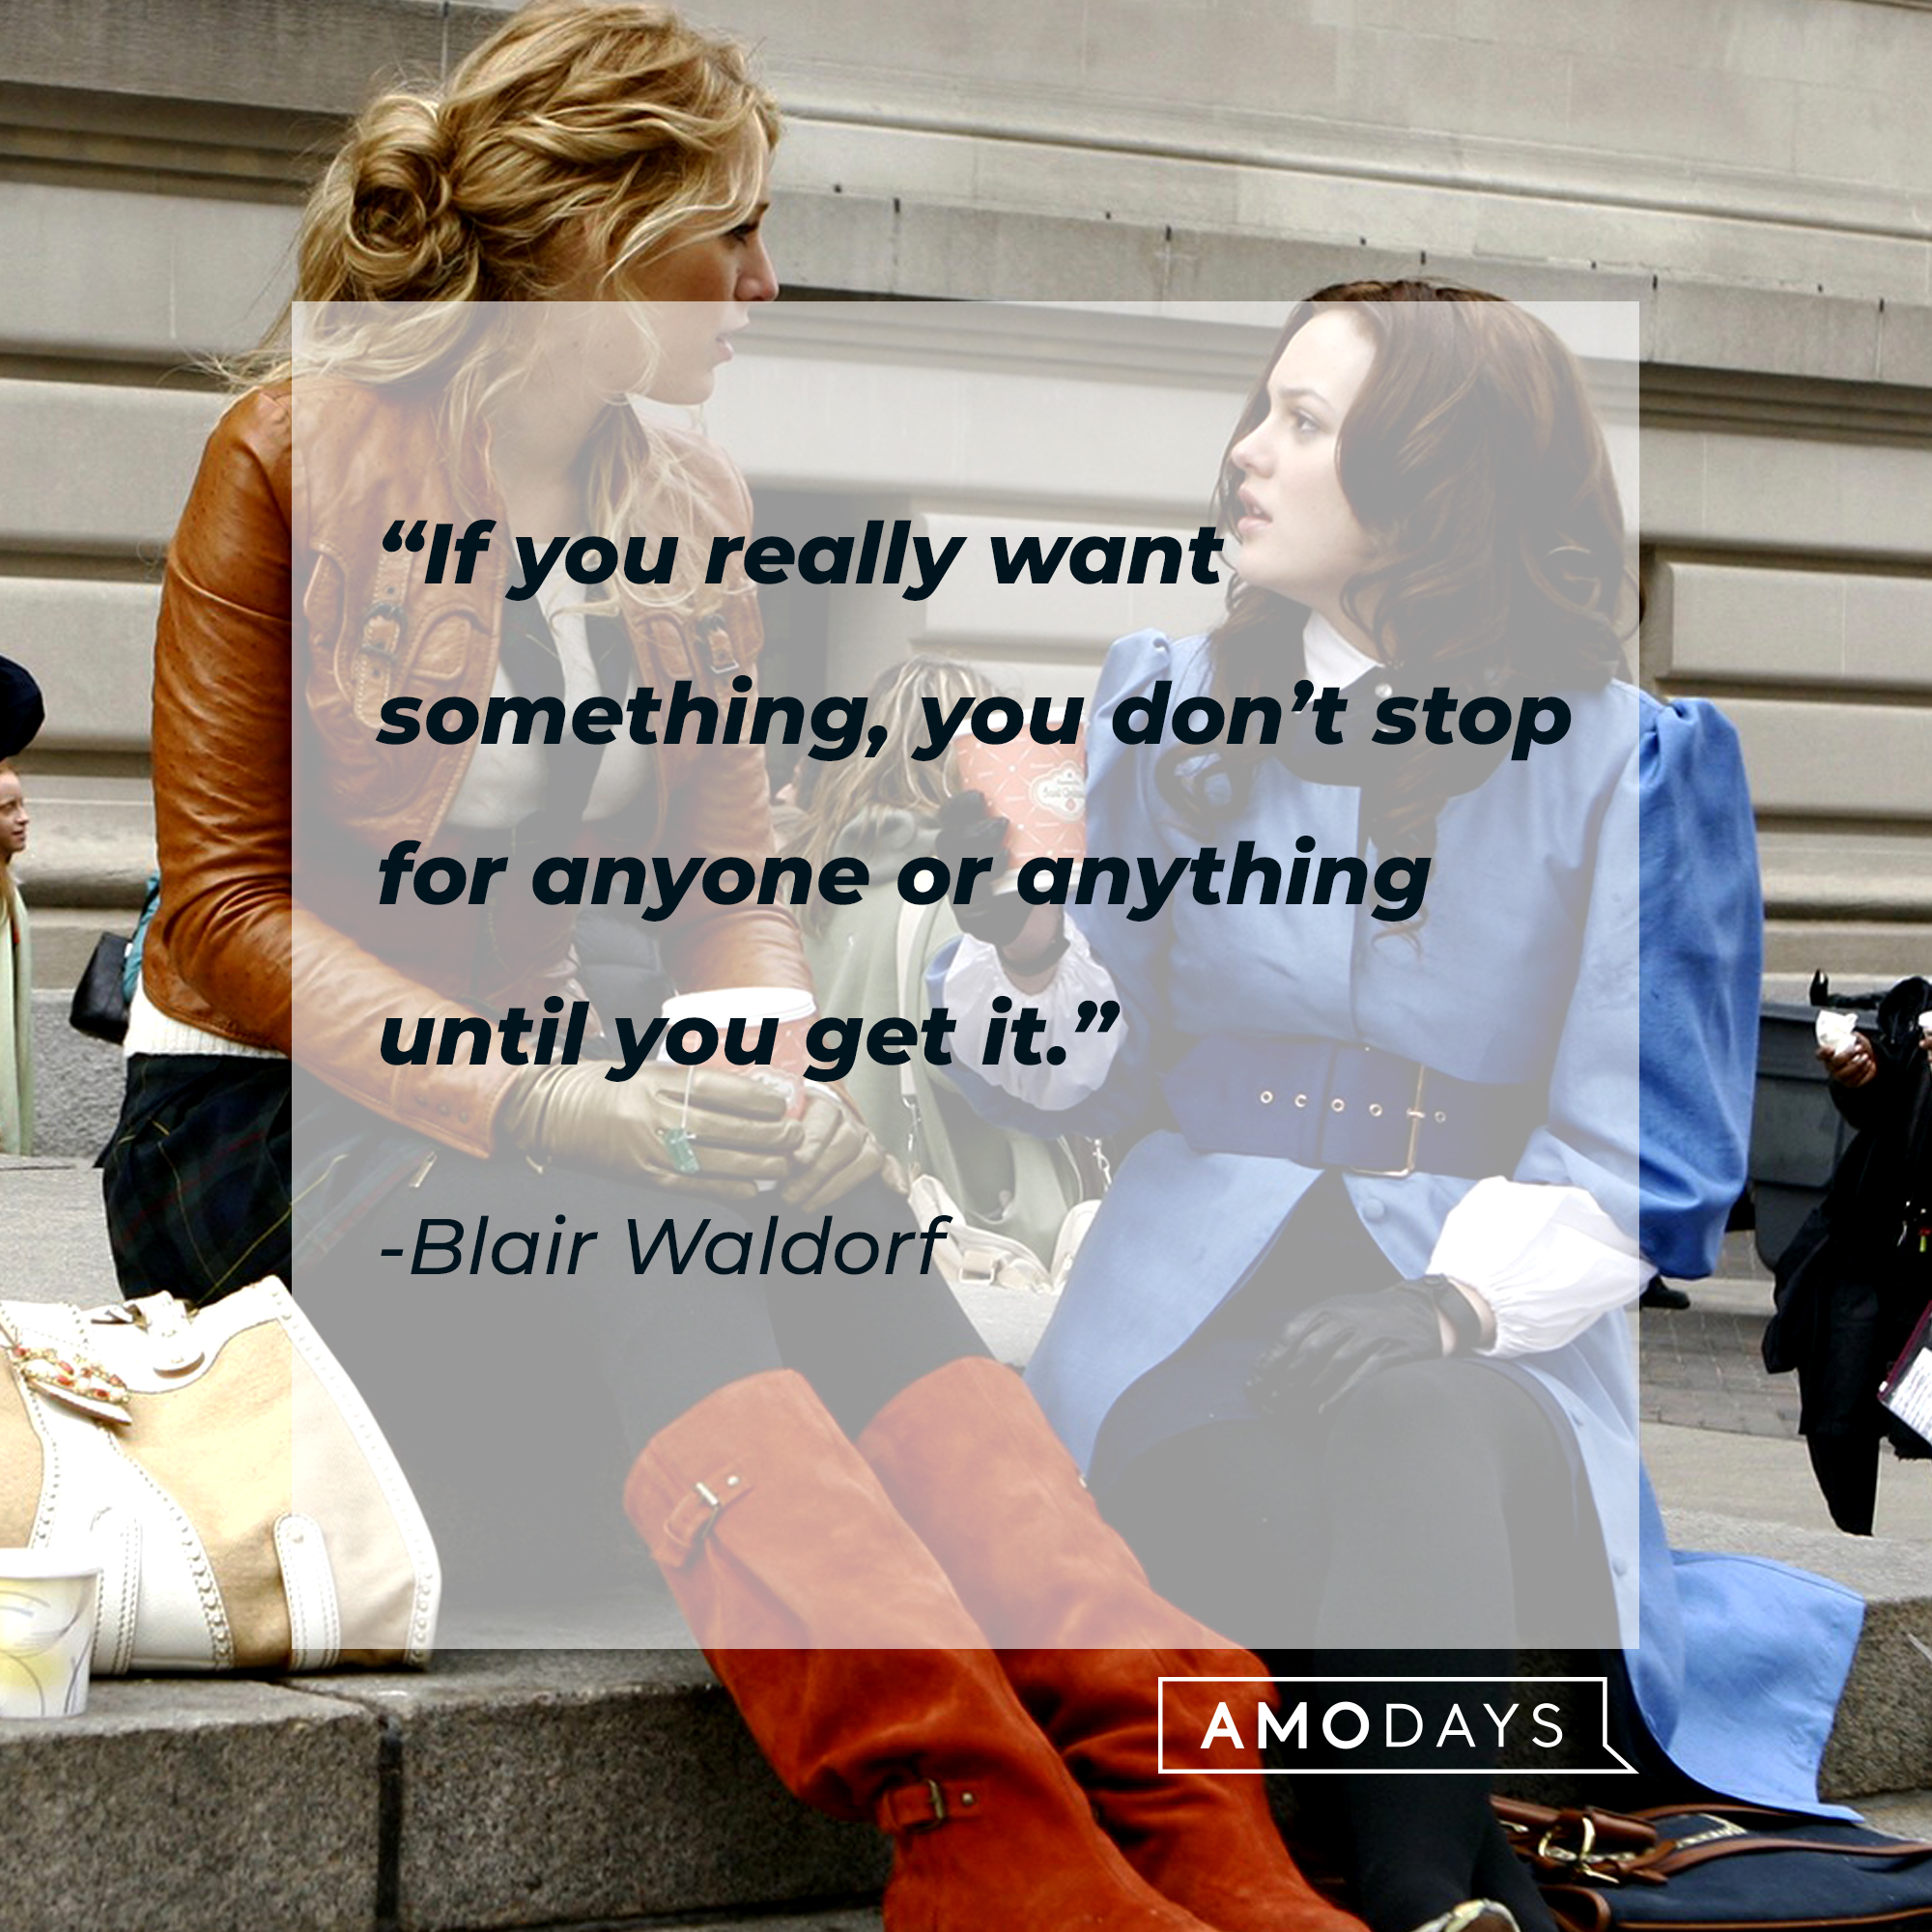 Characters from "Gossip Girl" with Blair Waldorf's quote: “If you really want something, you don’t stop for anyone or anything until you get it.” | Source: Facebook.com/GossipGirl